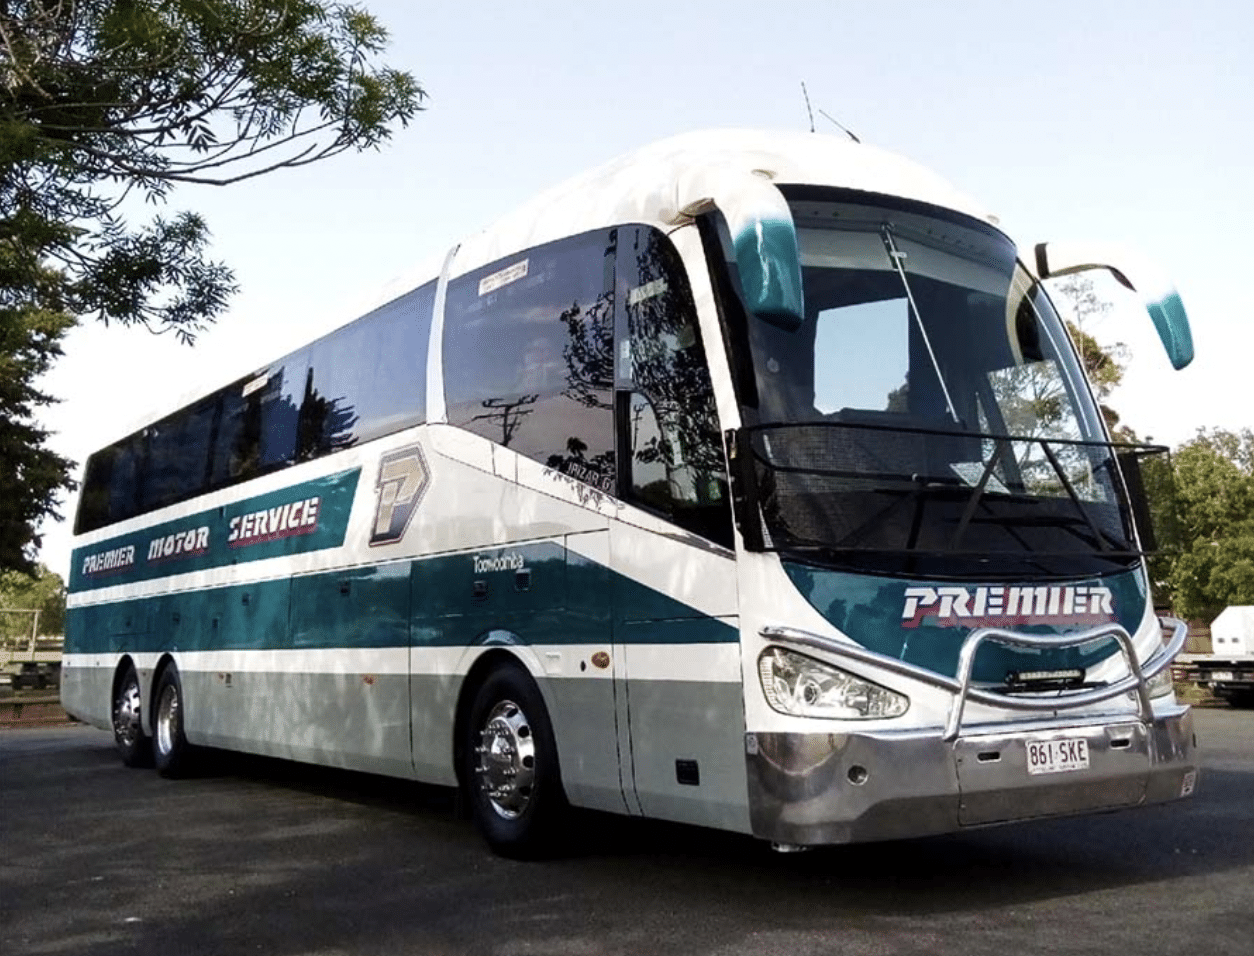 Luxury private coaches from Premier